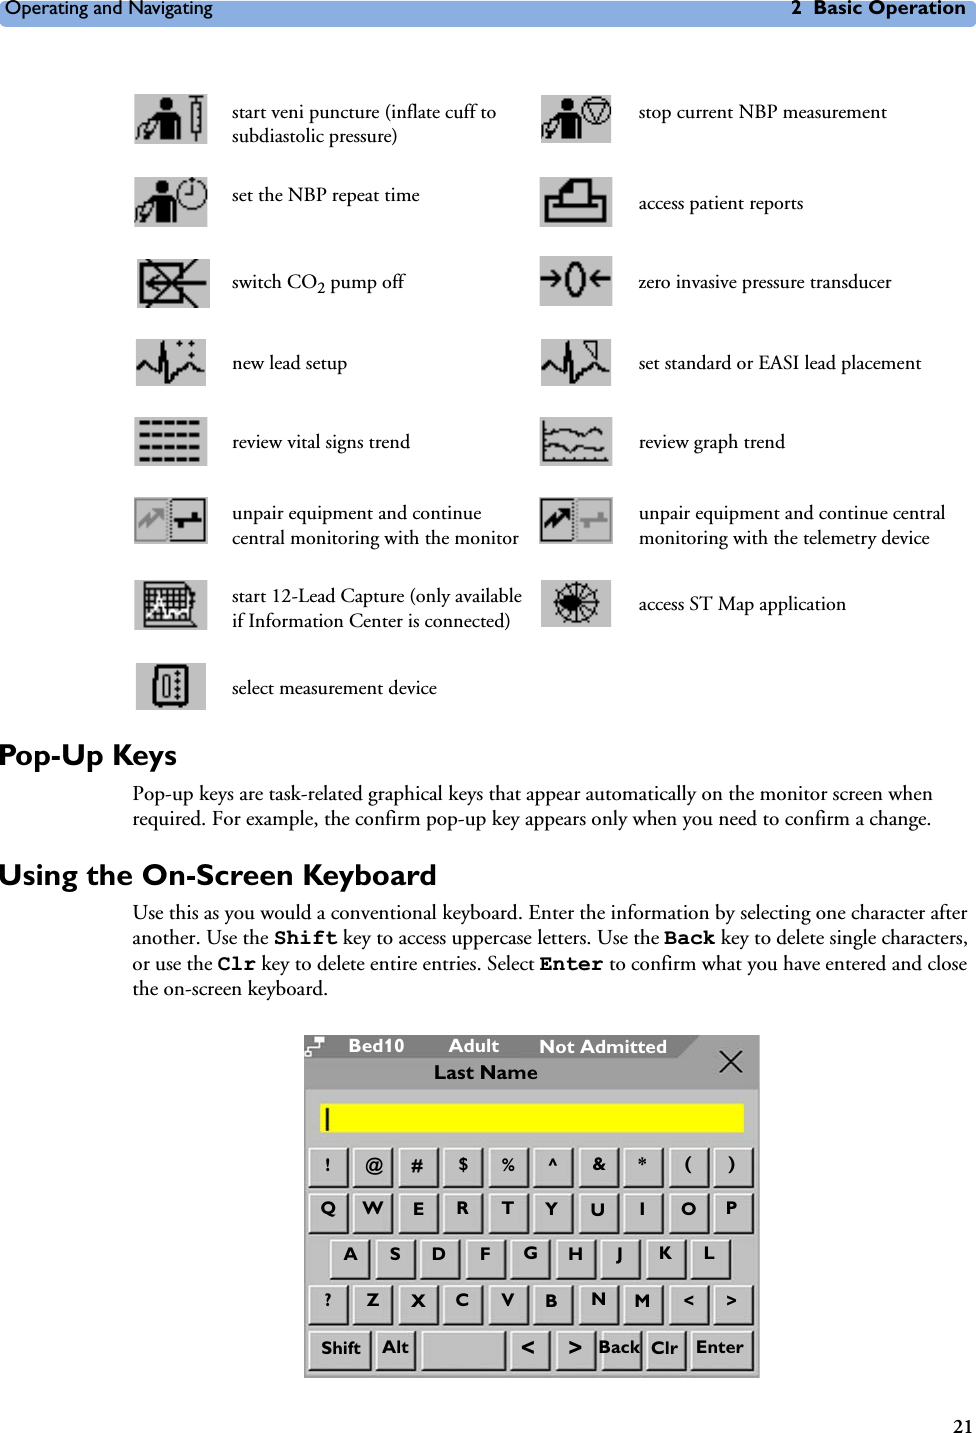 Operating and Navigating 2 Basic Operation21Pop-Up KeysPop-up keys are task-related graphical keys that appear automatically on the monitor screen when required. For example, the confirm pop-up key appears only when you need to confirm a change.Using the On-Screen KeyboardUse this as you would a conventional keyboard. Enter the information by selecting one character after another. Use the Shift key to access uppercase letters. Use the Back key to delete single characters, or use the Clr key to delete entire entries. Select Enter to confirm what you have entered and close the on-screen keyboard.start veni puncture (inflate cuff to subdiastolic pressure)stop current NBP measurementset the NBP repeat time access patient reportsswitch CO2 pump off zero invasive pressure transducernew lead setup set standard or EASI lead placementreview vital signs trend review graph trendunpair equipment and continue central monitoring with the monitorunpair equipment and continue central monitoring with the telemetry devicestart 12-Lead Capture (only available if Information Center is connected) access ST Map applicationselect measurement deviceAdultBed10 Not Admitted@!#$%^*()QWETR&amp;JGHFDSAPOIUY?ZXVC&gt;&lt;MNBKLAlt &lt;&gt; ClrShift Back EnterLast Name